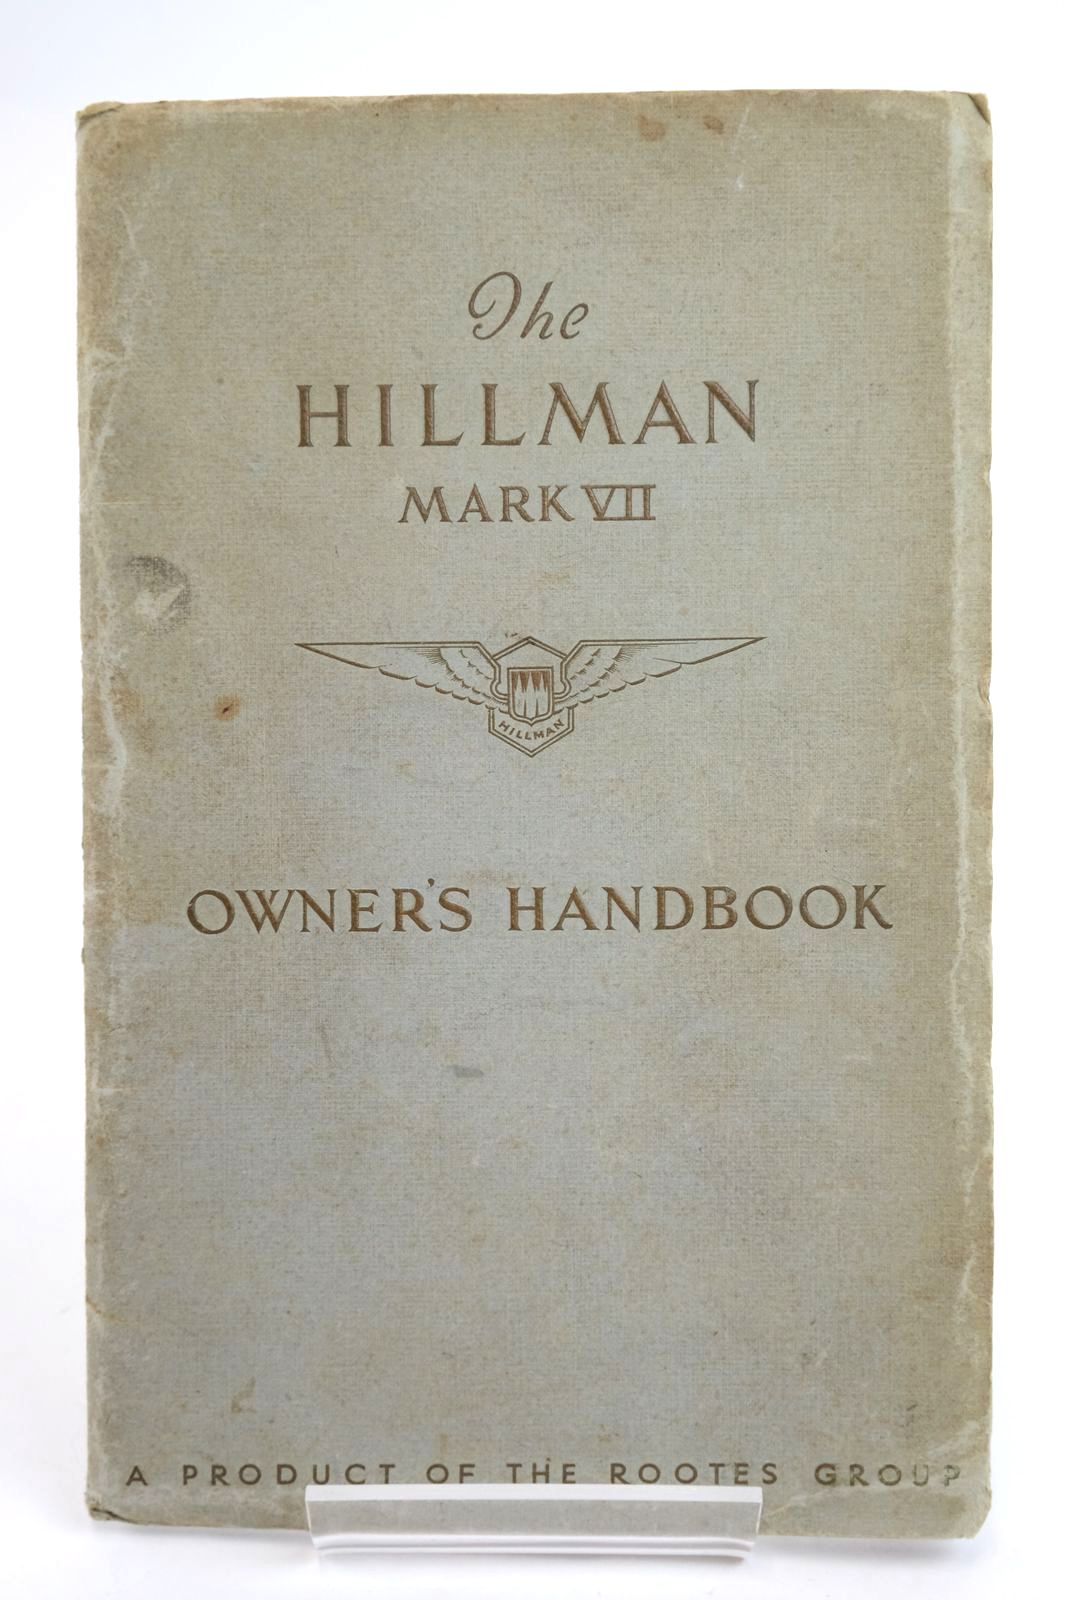 Photo of OWNER'S HANDBOOK FOR THE HILLMAN MARK VII published by Hillman Motor Car Co. Ltd. (STOCK CODE: 2136071)  for sale by Stella & Rose's Books